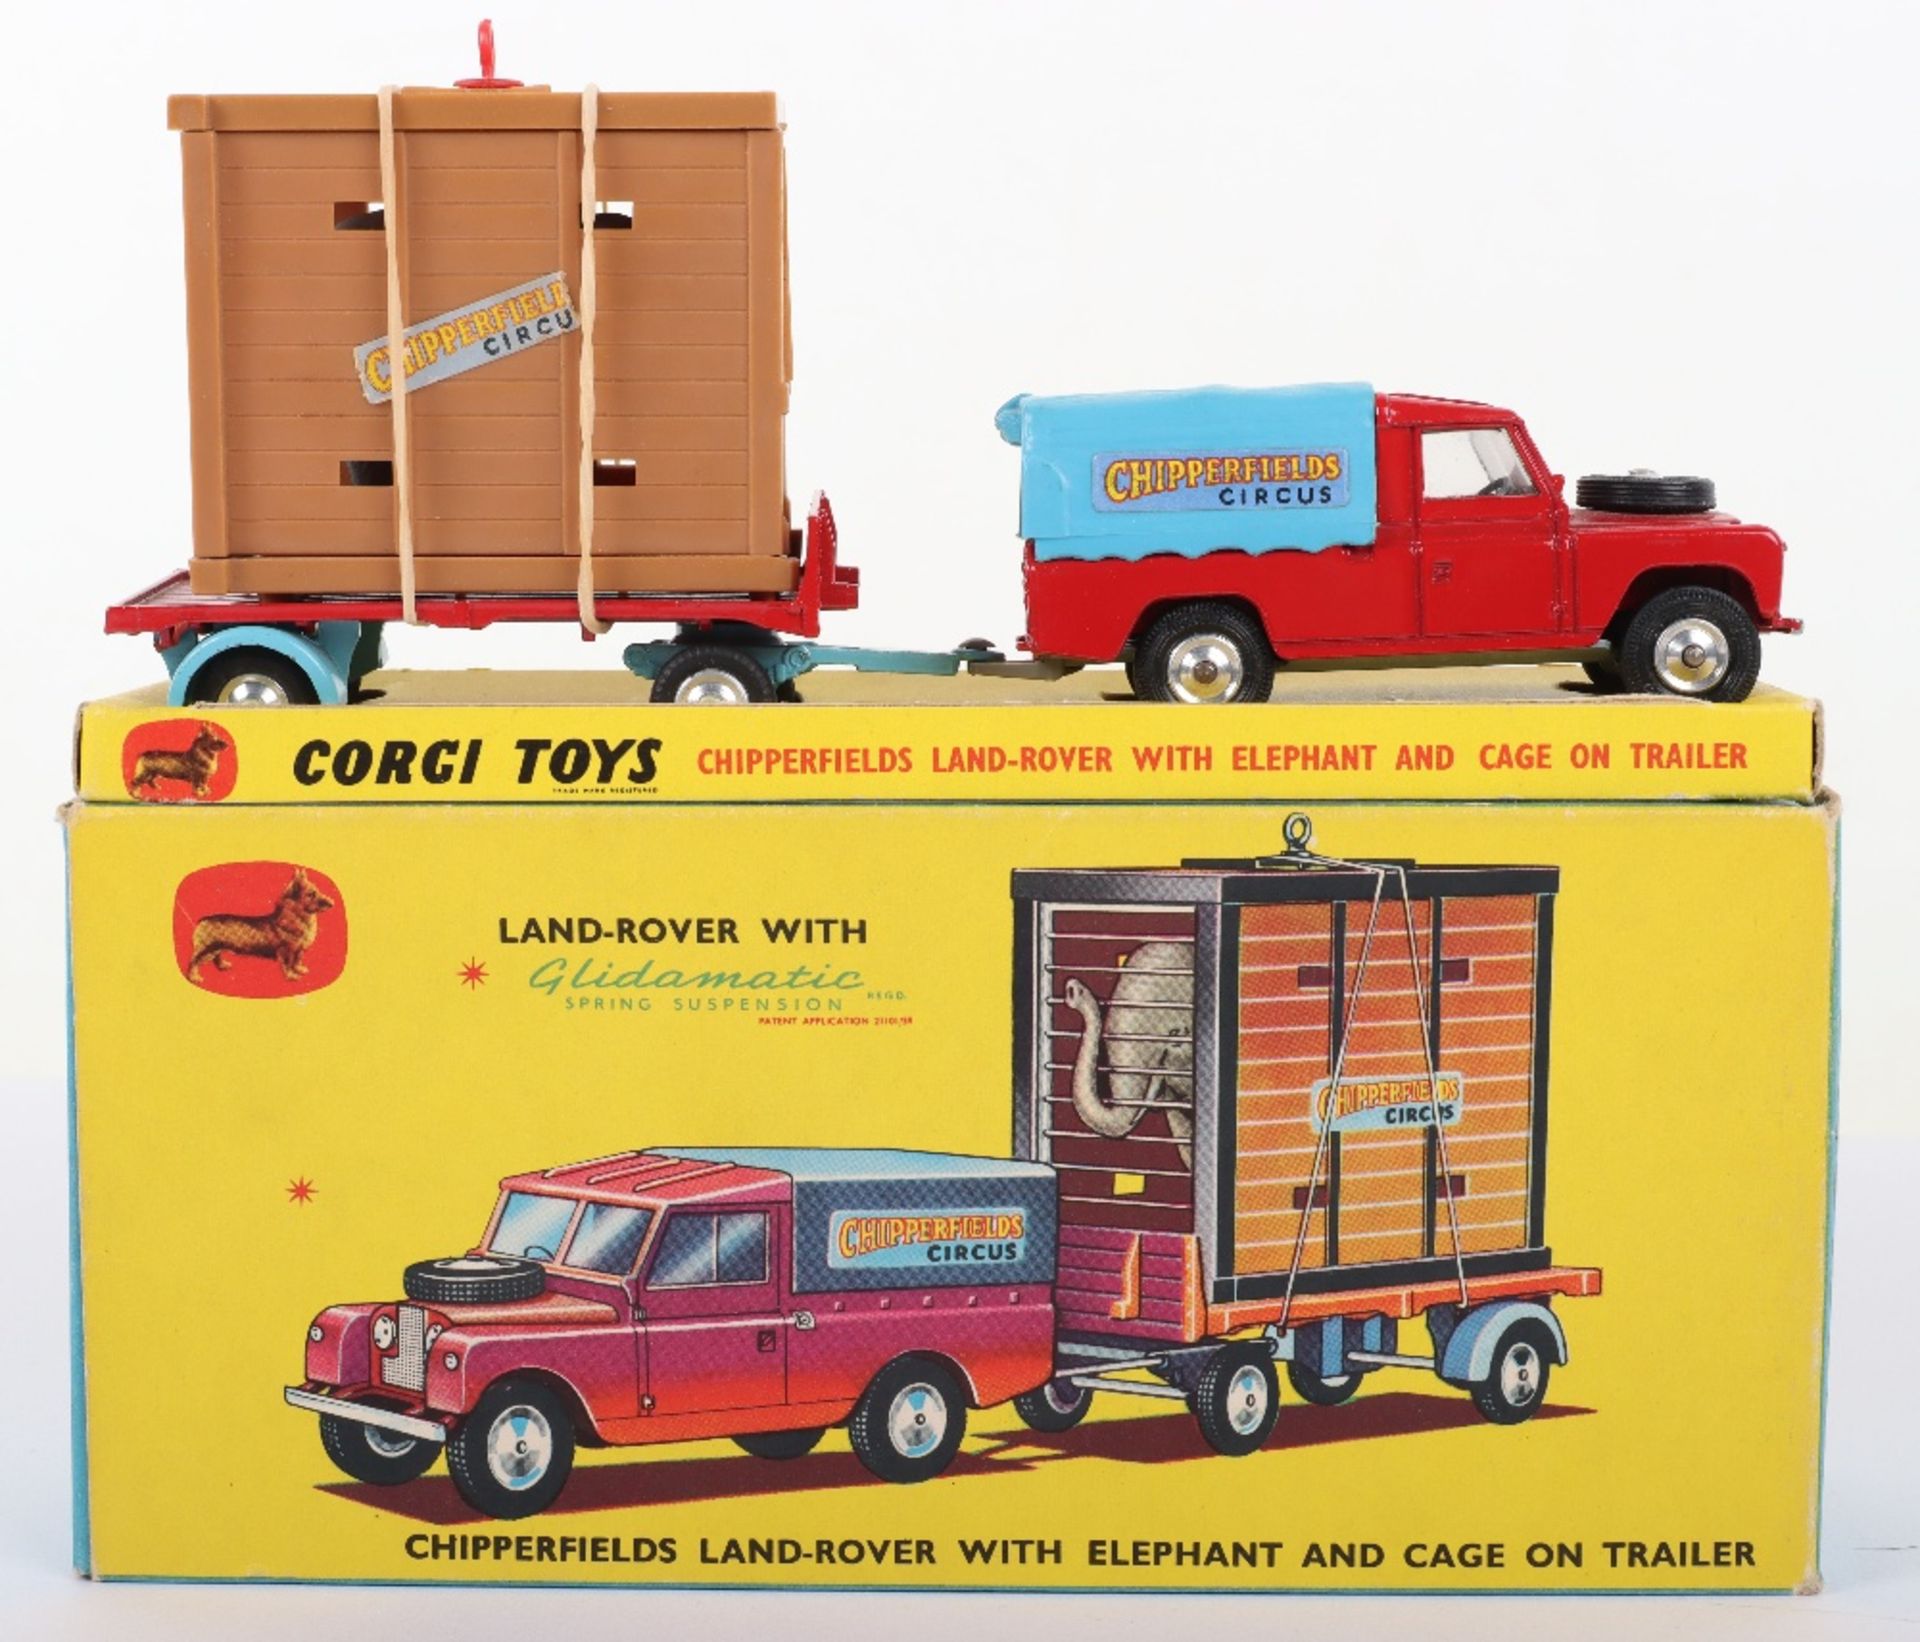 Corgi Toys Gift Set 19 Chipperfield’s Circus Land-Rover with Elephant and Cage on Trailer - Bild 2 aus 4